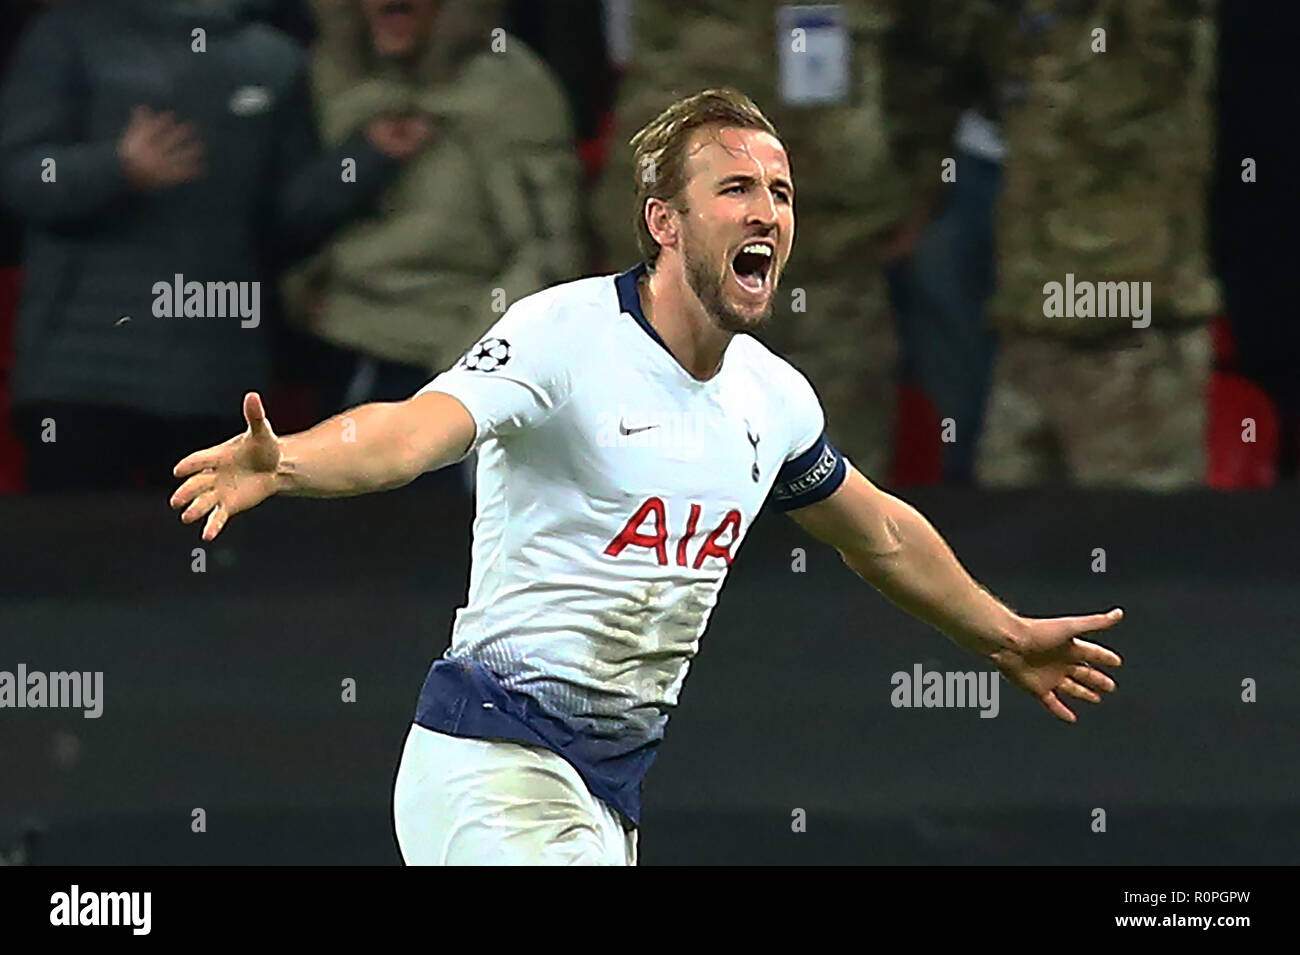 London, England, 06th November 2018.  Tottenham Hotspur's Harry Kane celebrates his goal during Champion League Group B between Tottenham Hotspur and PSV Eindhoven at Wembley stadium , London, England on 06 Nov 2018. Credit Action Foto Sport  FA Premier League and Football League images are subject to DataCo Licence. Editorial use ONLY. No print sales. No personal use sales. NO UNPAID USE Credit: Action Foto Sport/Alamy Live News Stock Photo